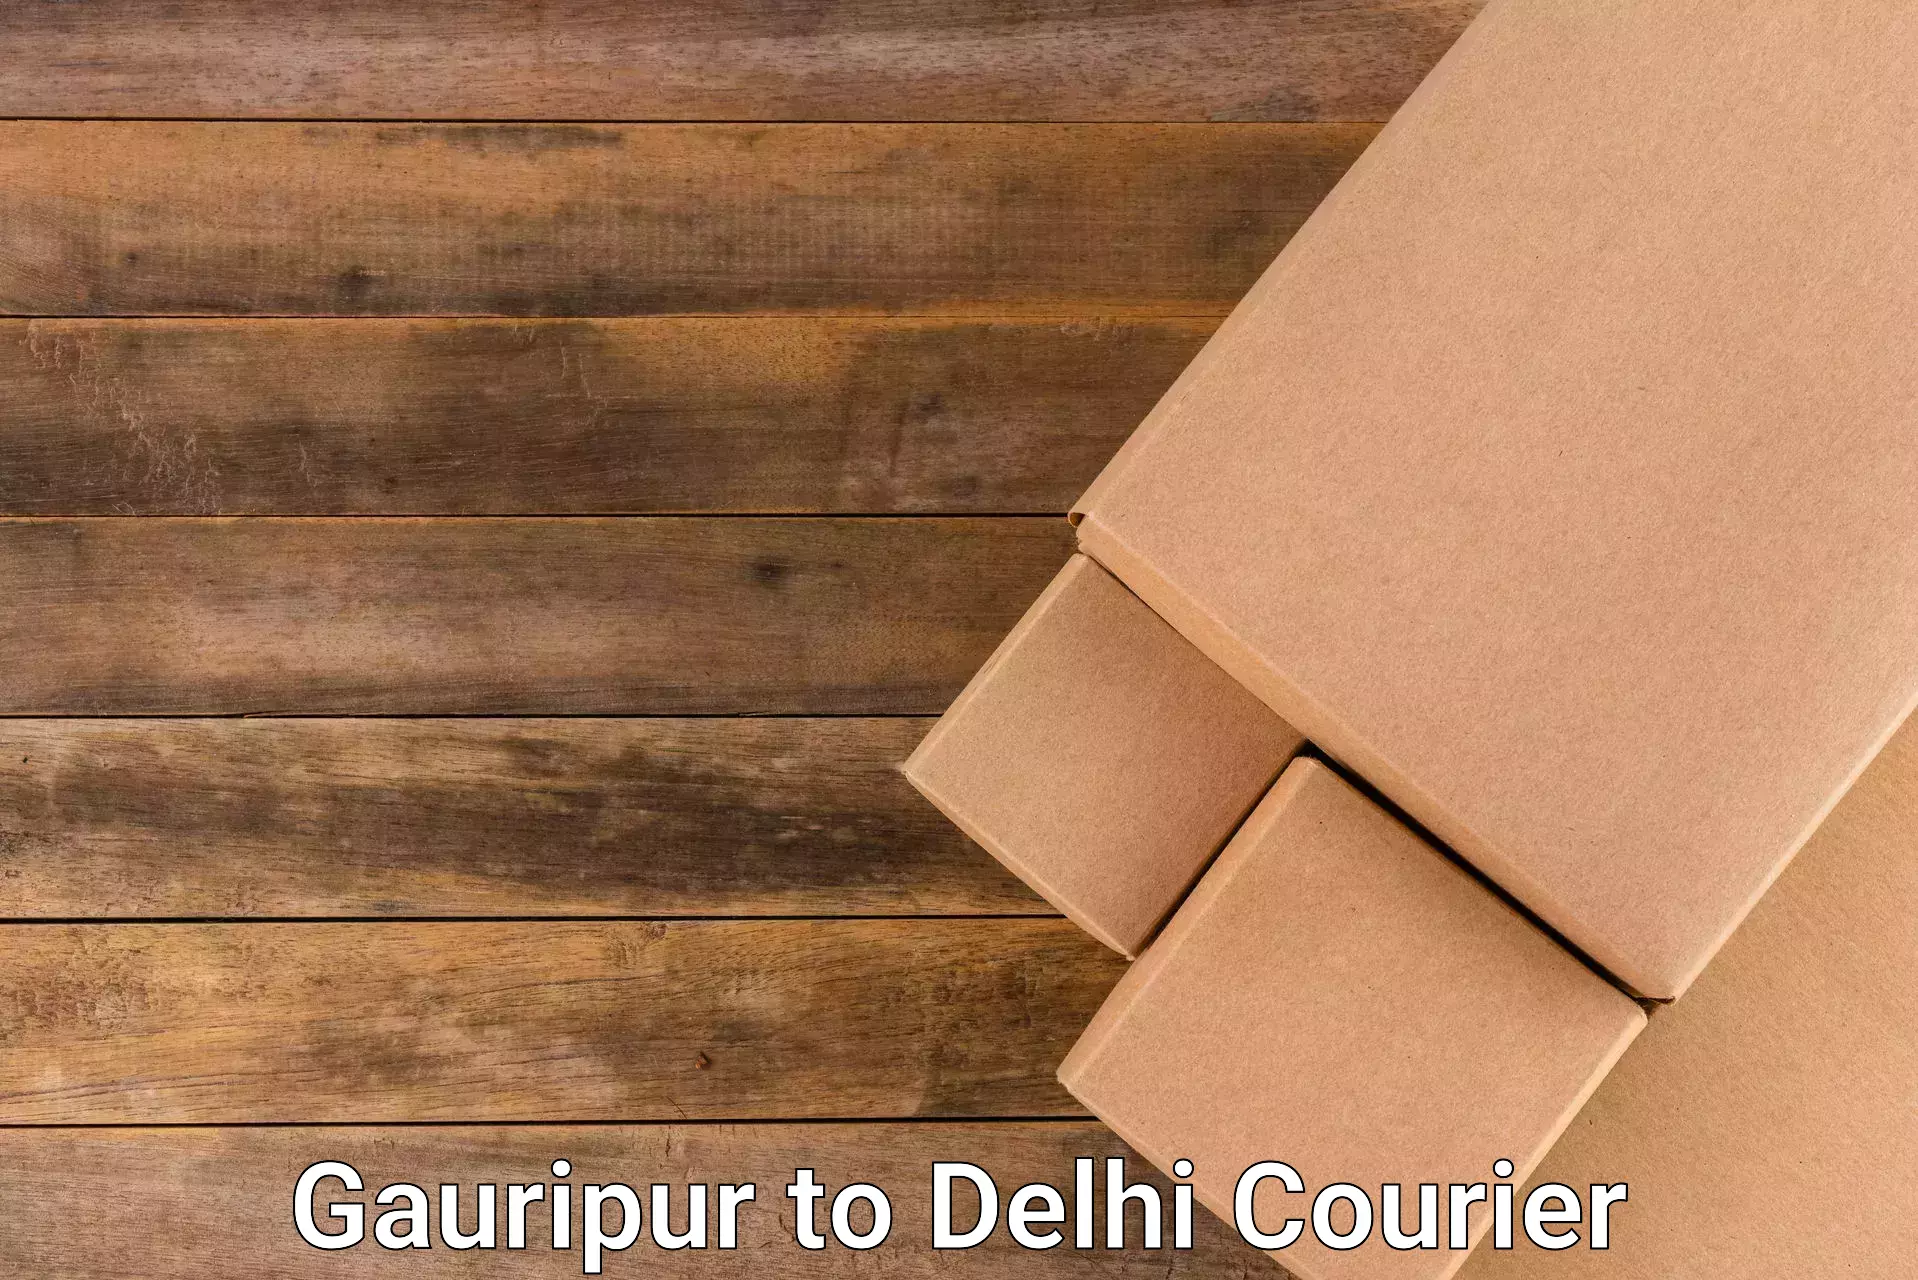 Advanced delivery network Gauripur to Delhi